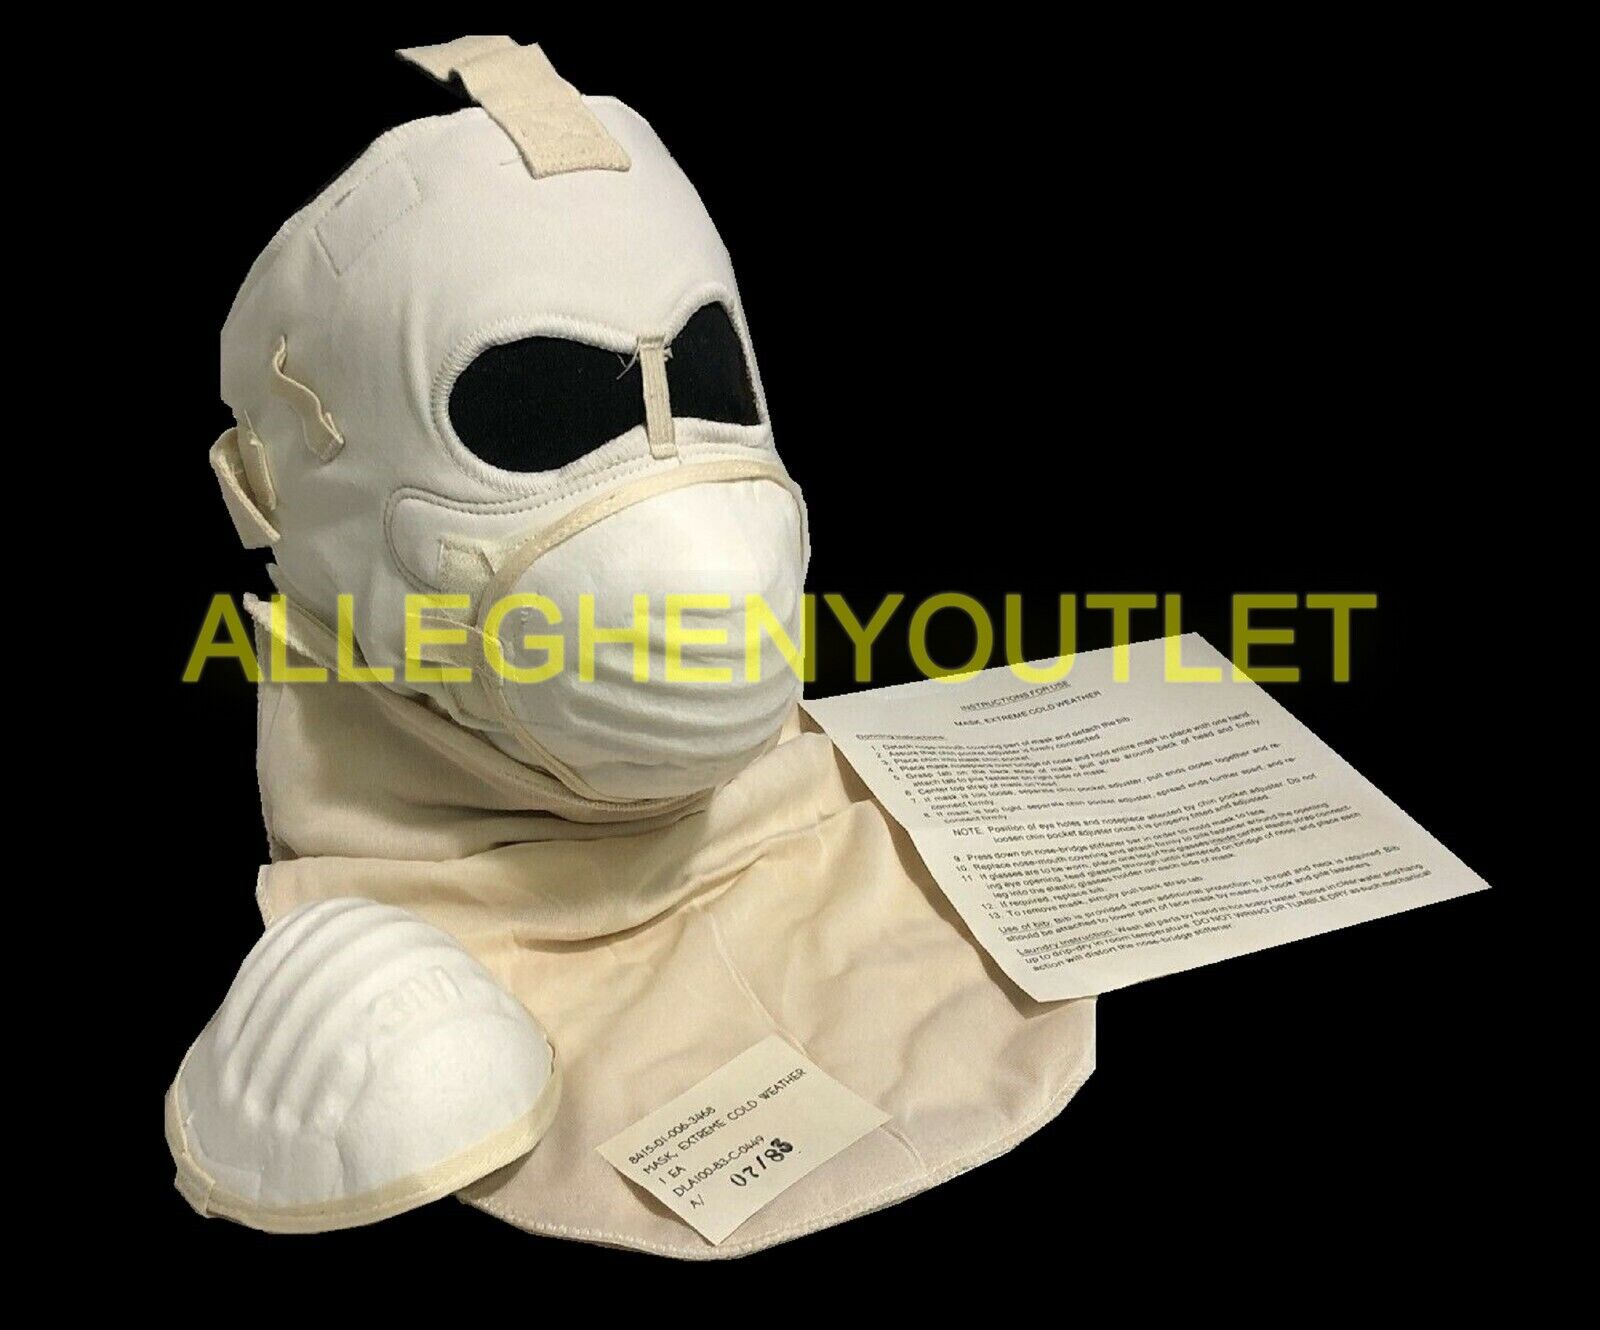 US MILITARY SURPLUS EXTREME COLD WEATHER FACE MASK w/ FILTERS 